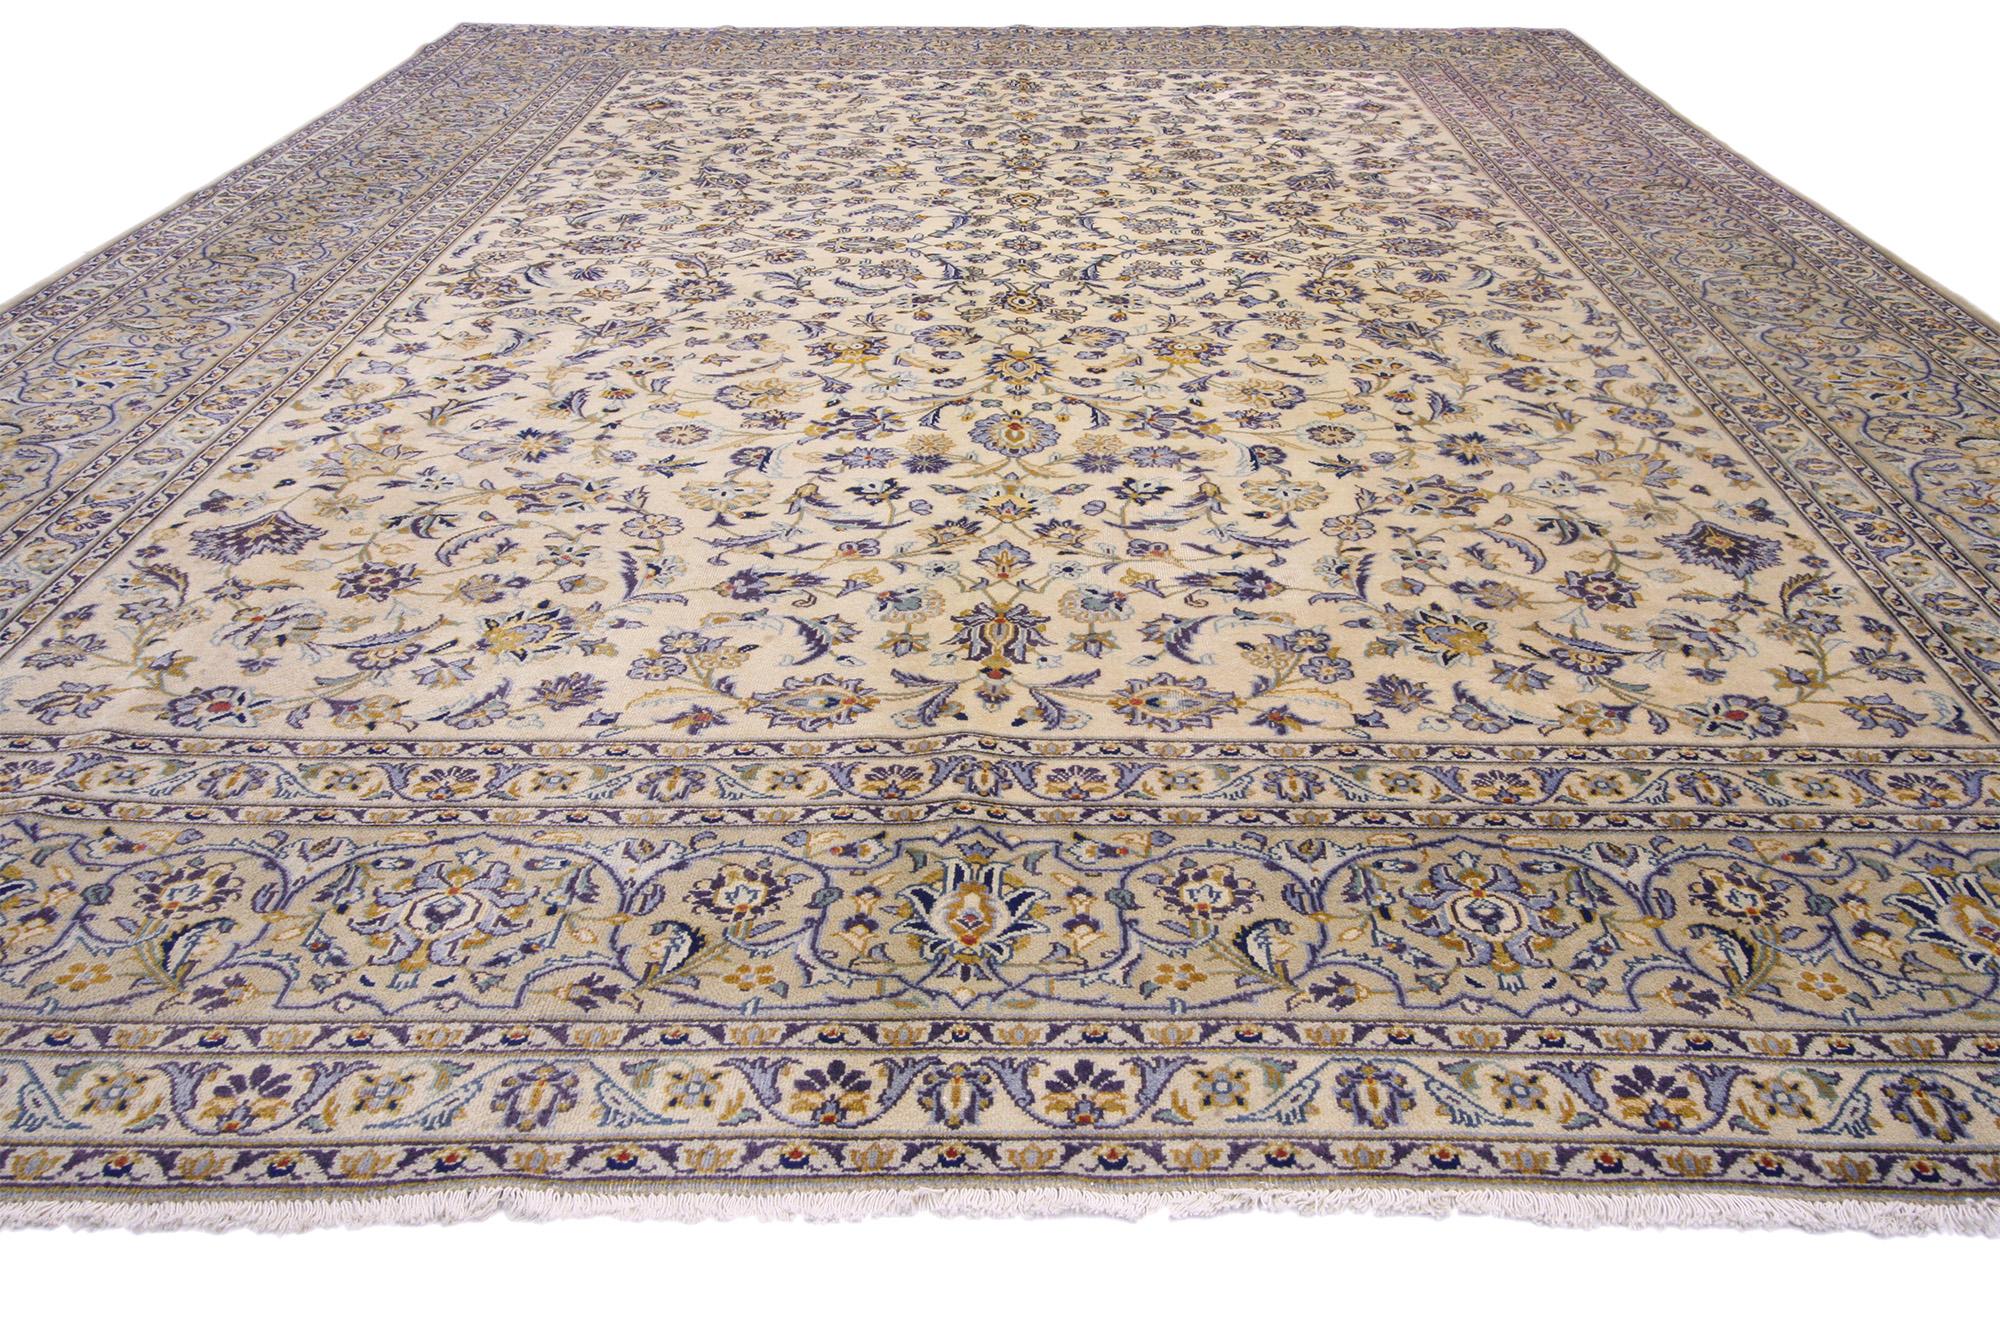 Vintage Persian Kashan Rug, Neoclassic Elegance Meets Timeless Appeal In Good Condition For Sale In Dallas, TX